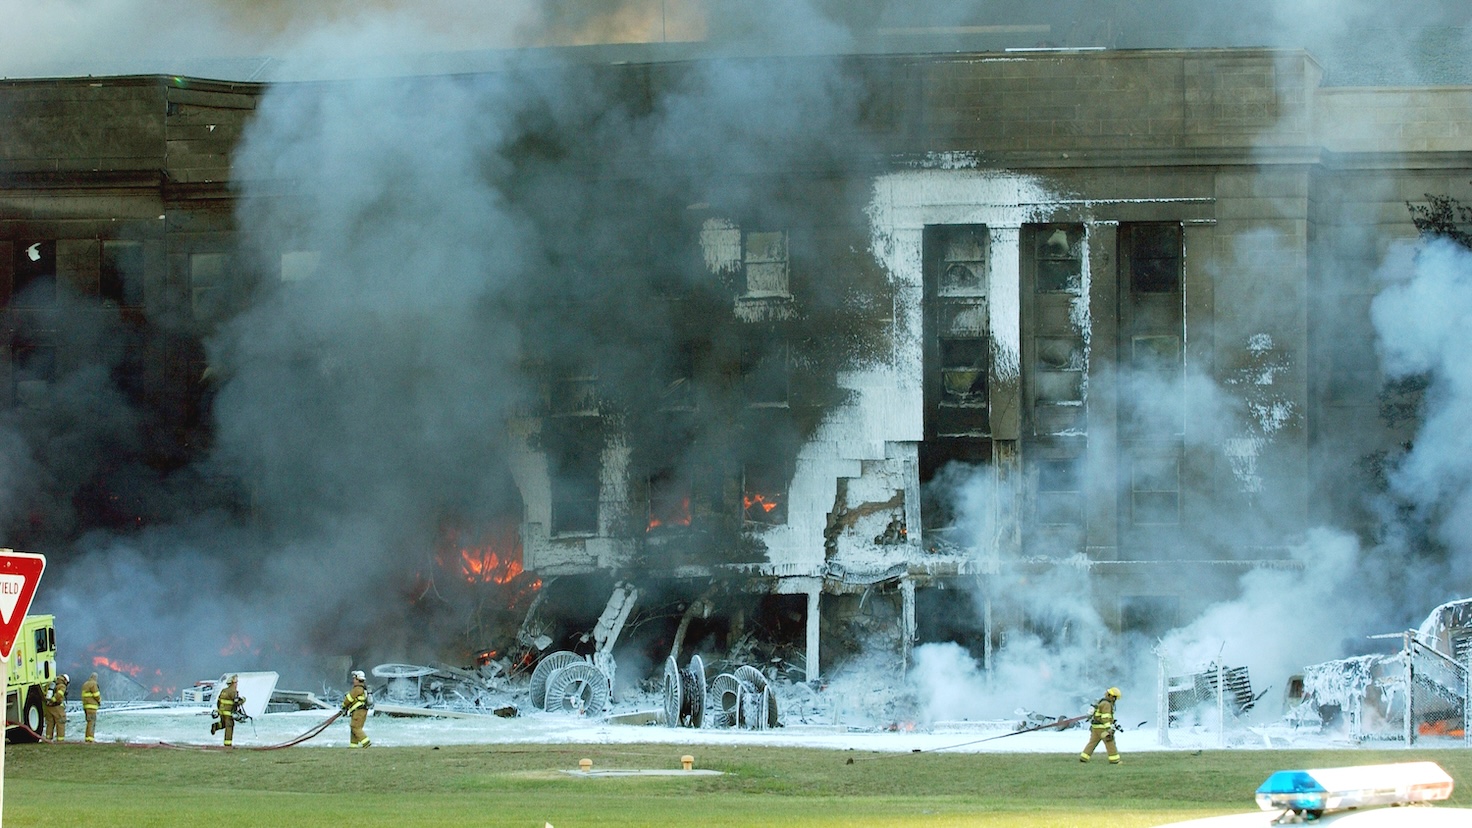 Firefighters work to put out the flames moments after a hijacked jetliner crashed into the Pentagon at approximately 0930 on September 11, 2001.